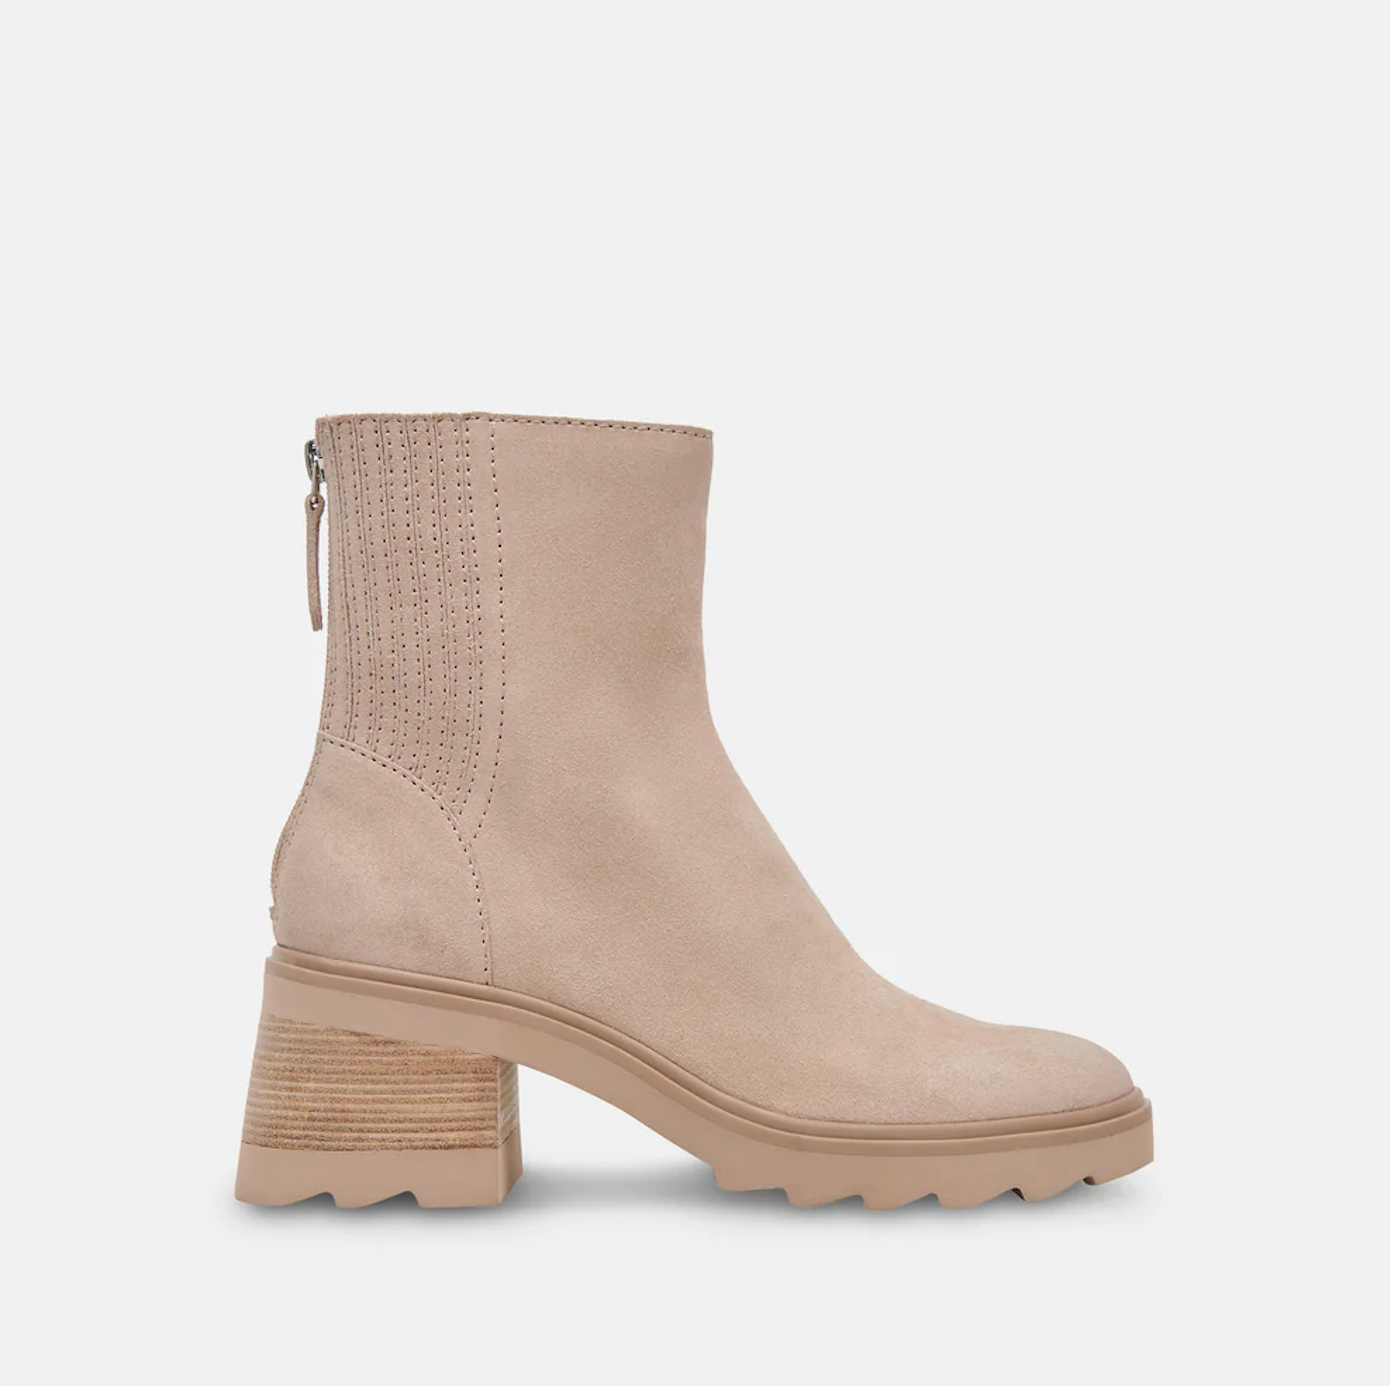 DOLCE VITA MARTEY H2O BOOTS IN TAUPE SUEDE